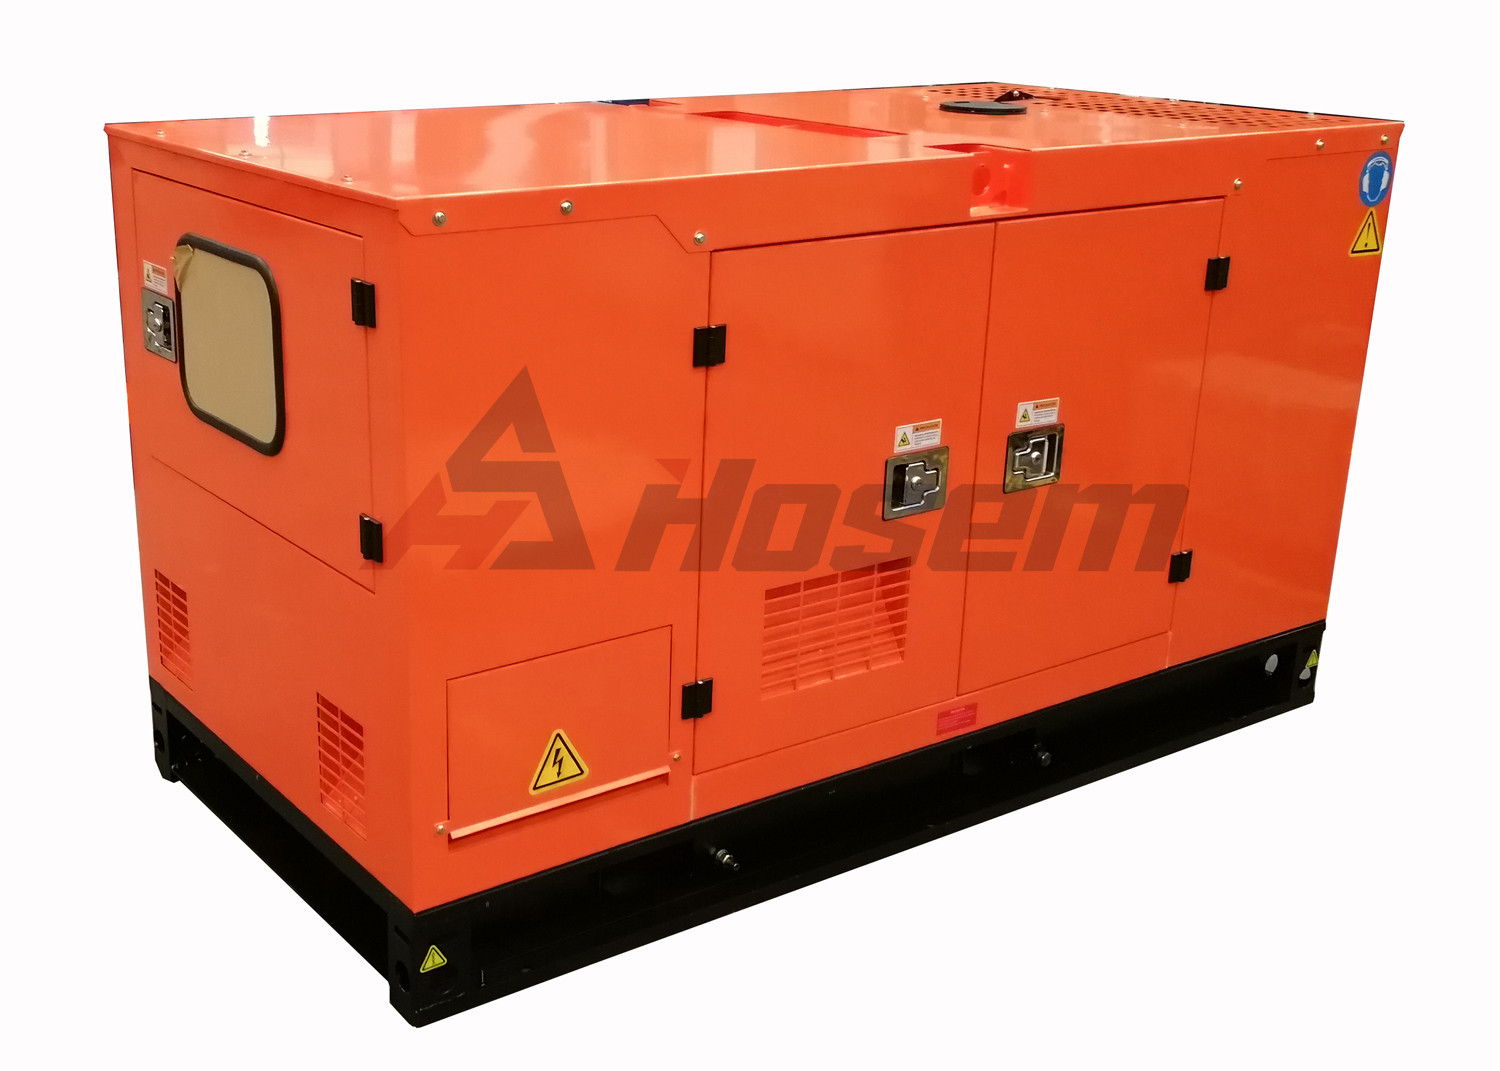 Standby 10kVA Diesel Generator Set with Quanchai Diesel Engine and Brushless Alternator